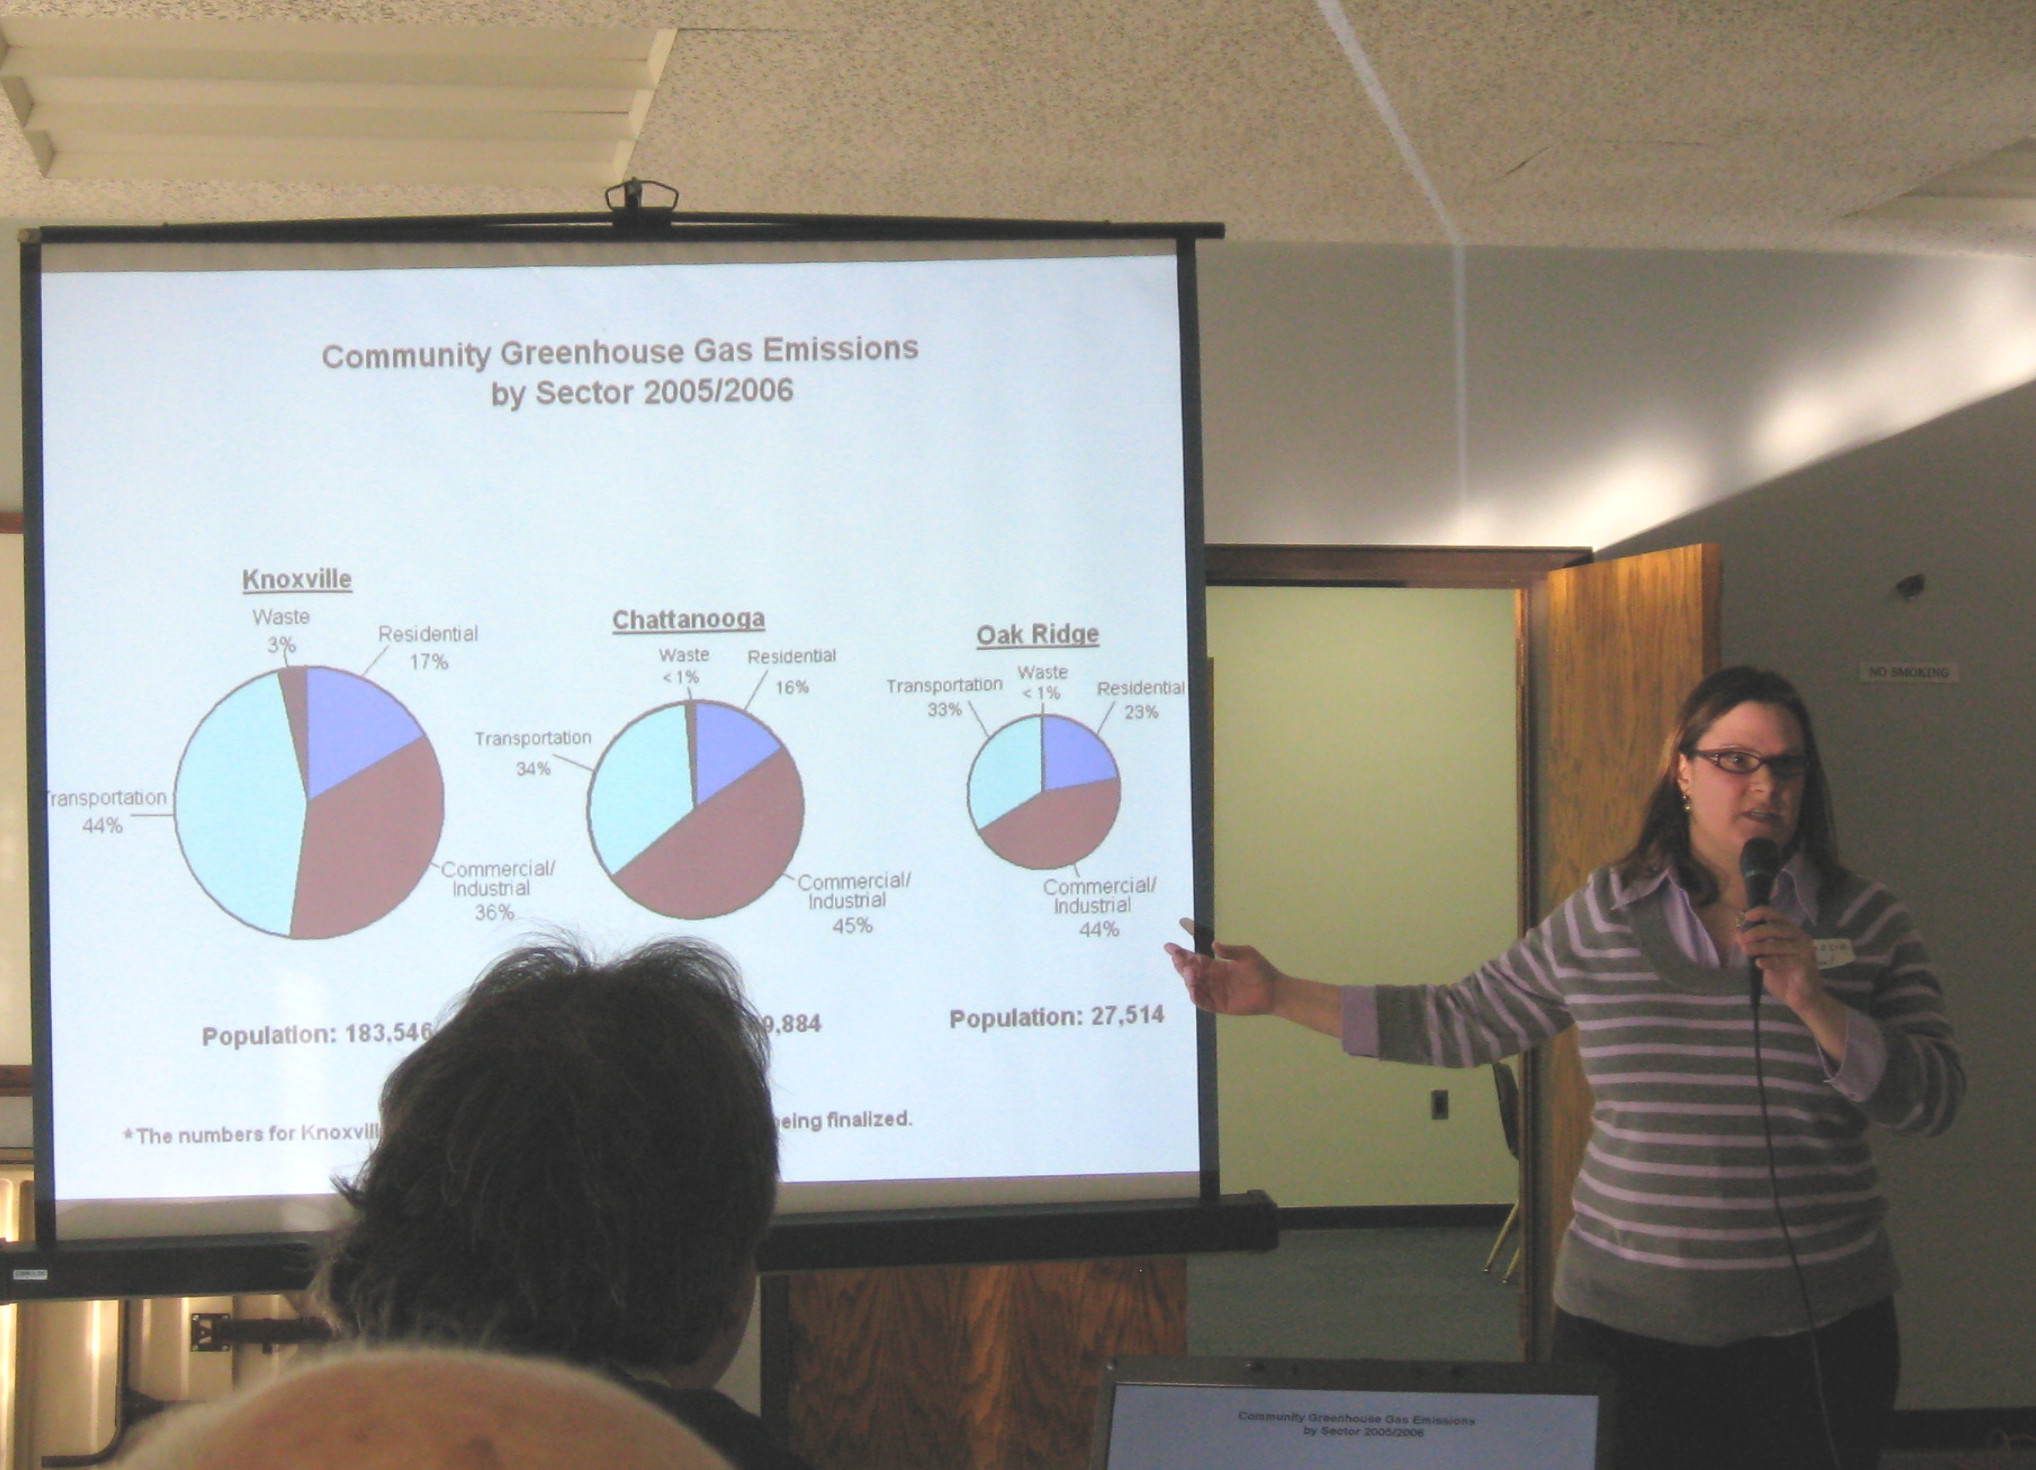 Athanasia Senecal describes results of Oak Ridge's greenhouse gas emissions inventory